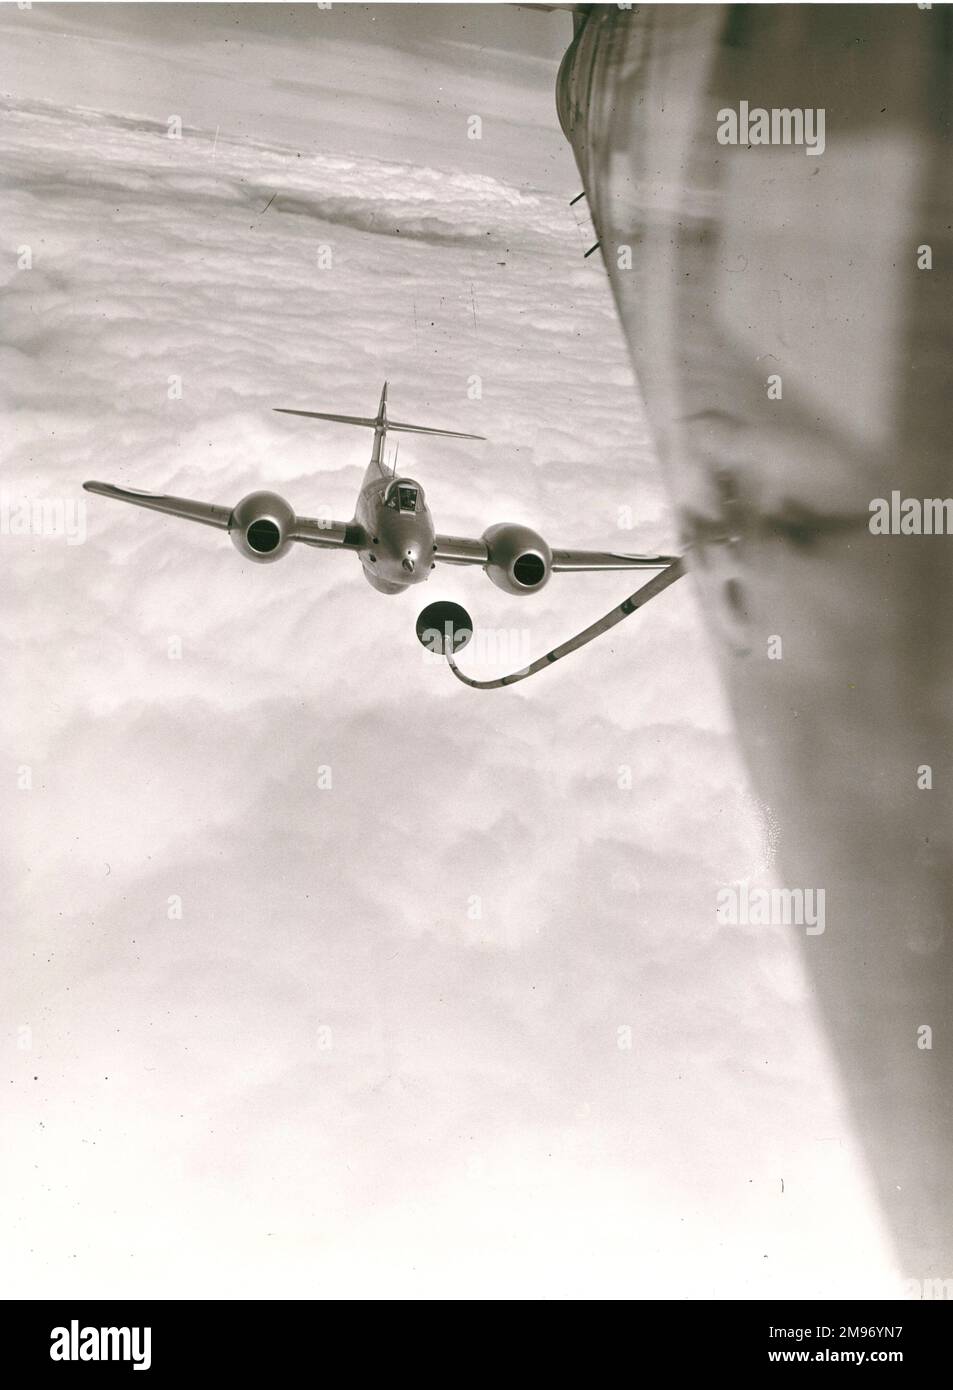 Gloster Meteor about to refuel in flight, from USAF Boeing YKB-29T Superfortress (45-21734), modified from KB-29M configuration with wing-tip probe and drogue refuelling points. Stock Photo